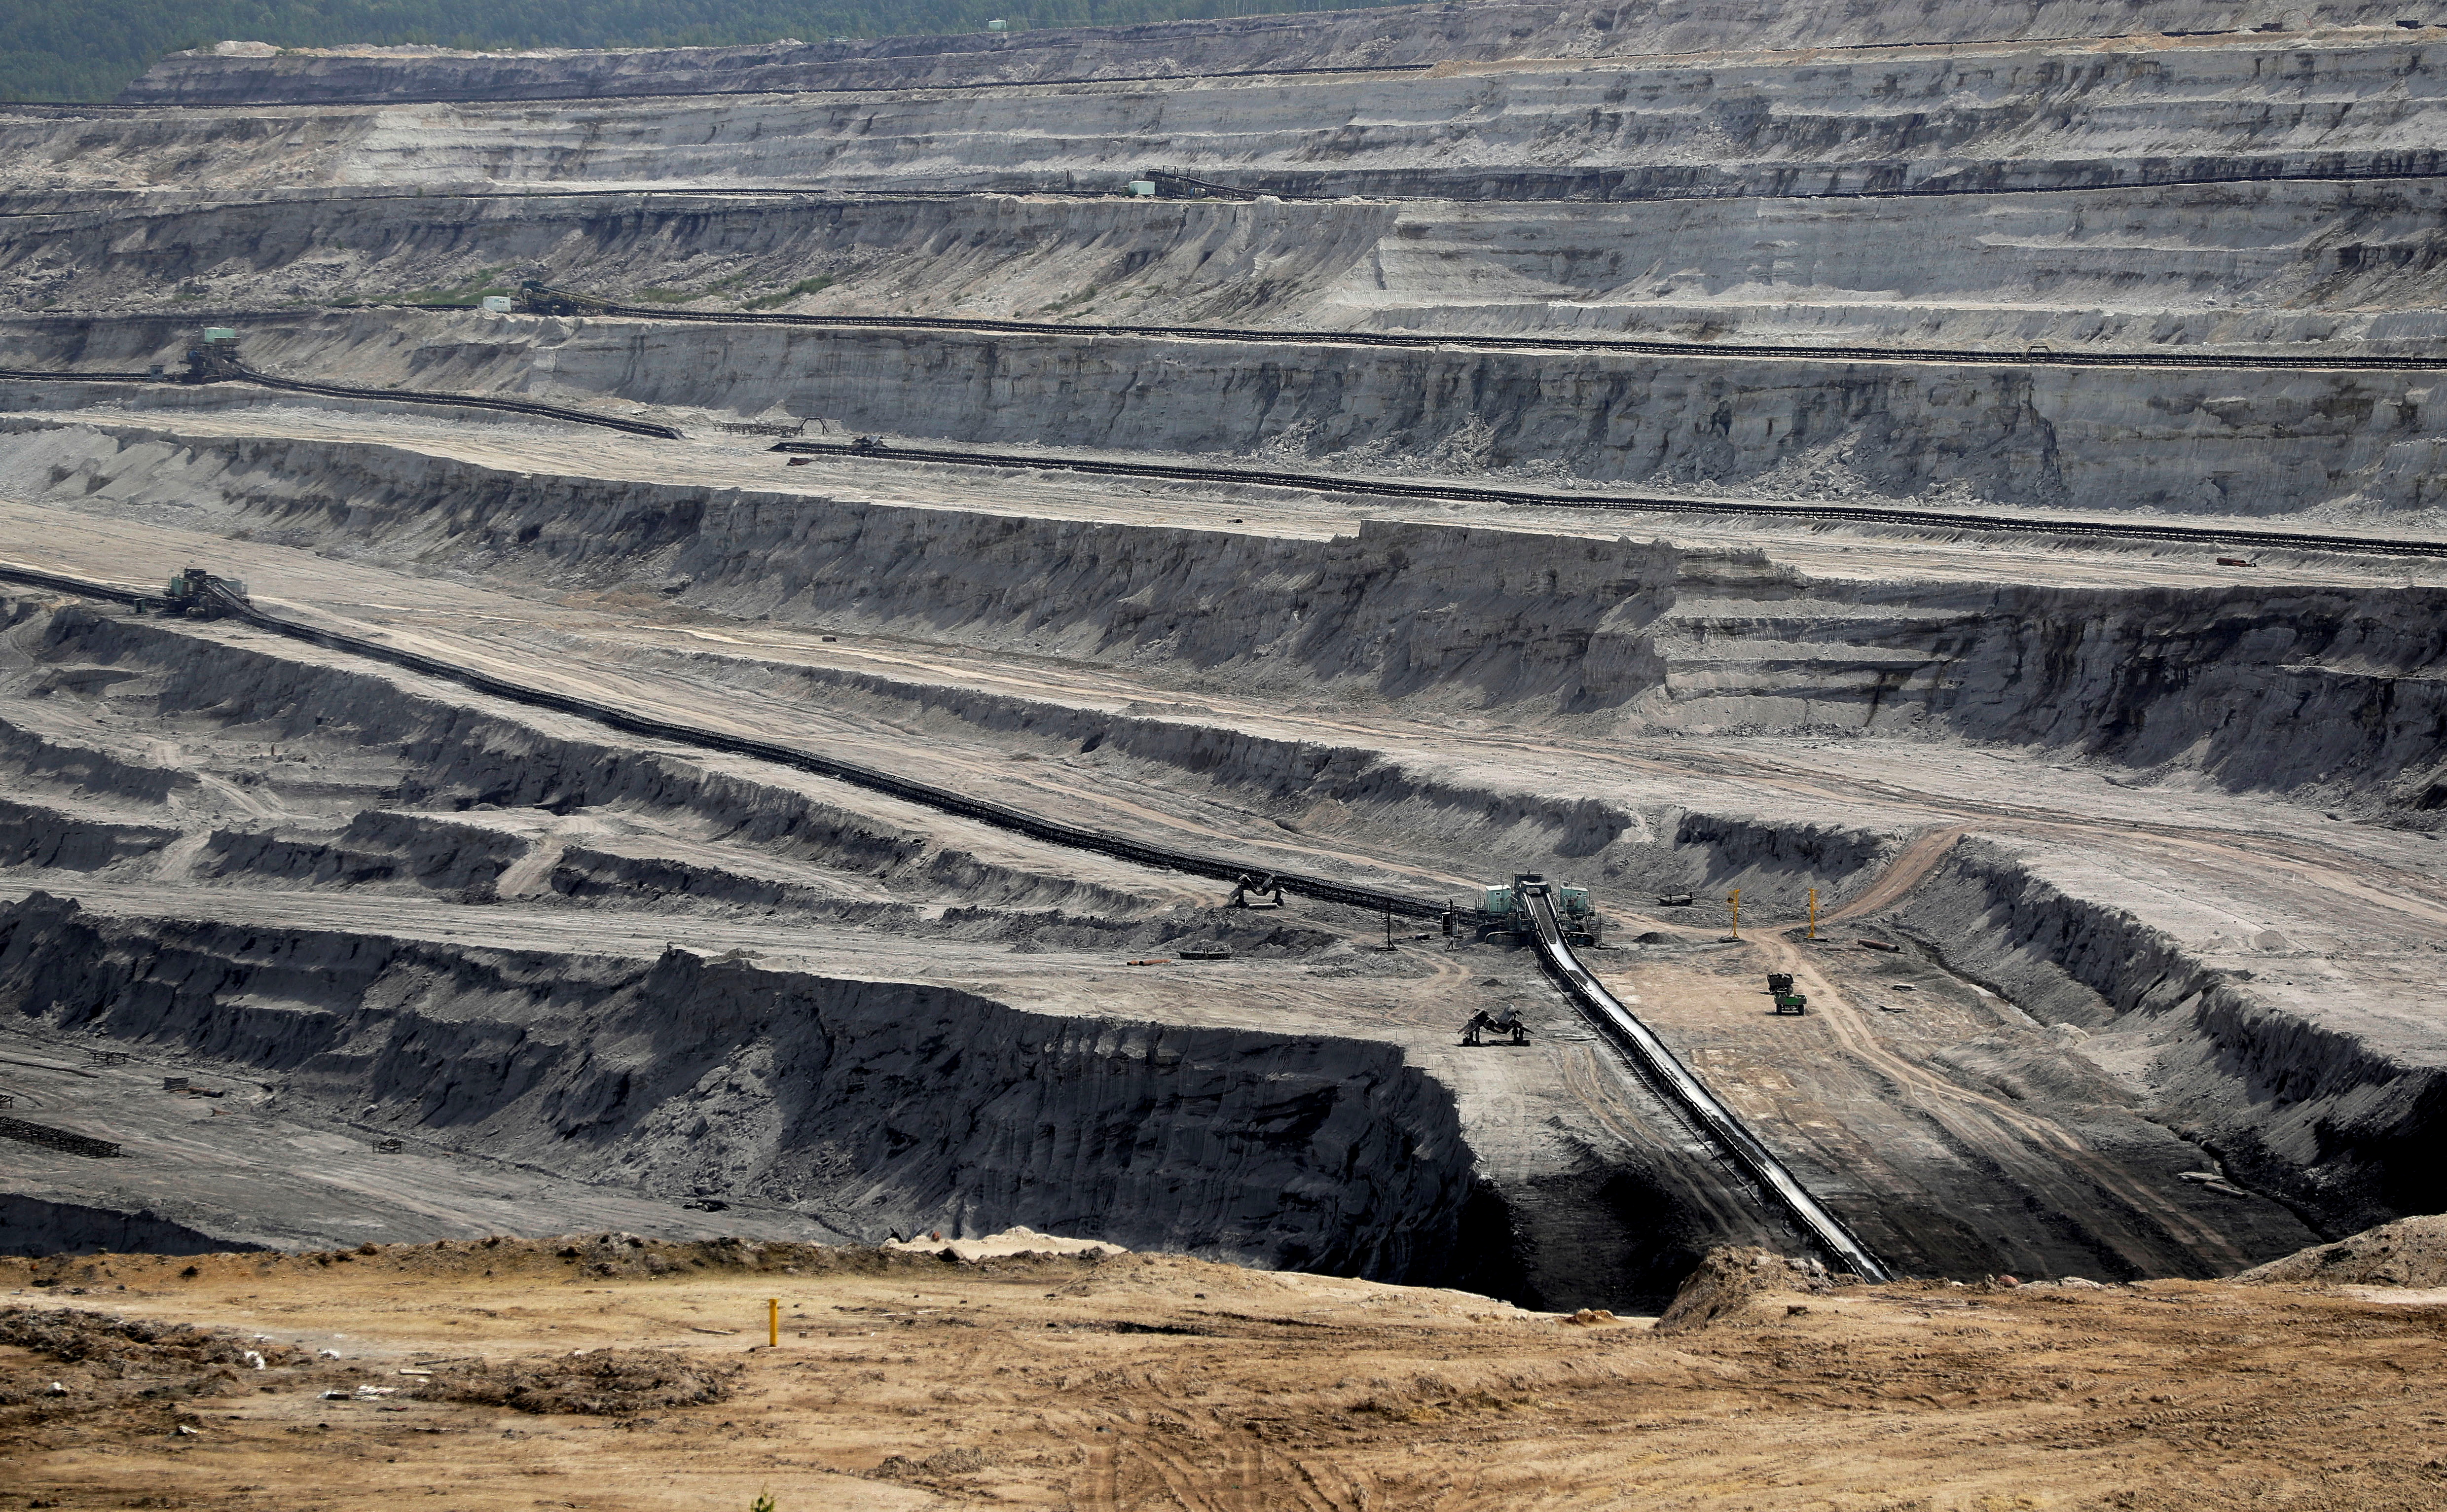 The Turow open-pit coal mine operated by the company PGE is seen in Bogatynia, Poland, June 15, 2021. Picture taken June 15, 2021. REUTERS/David W Cerny